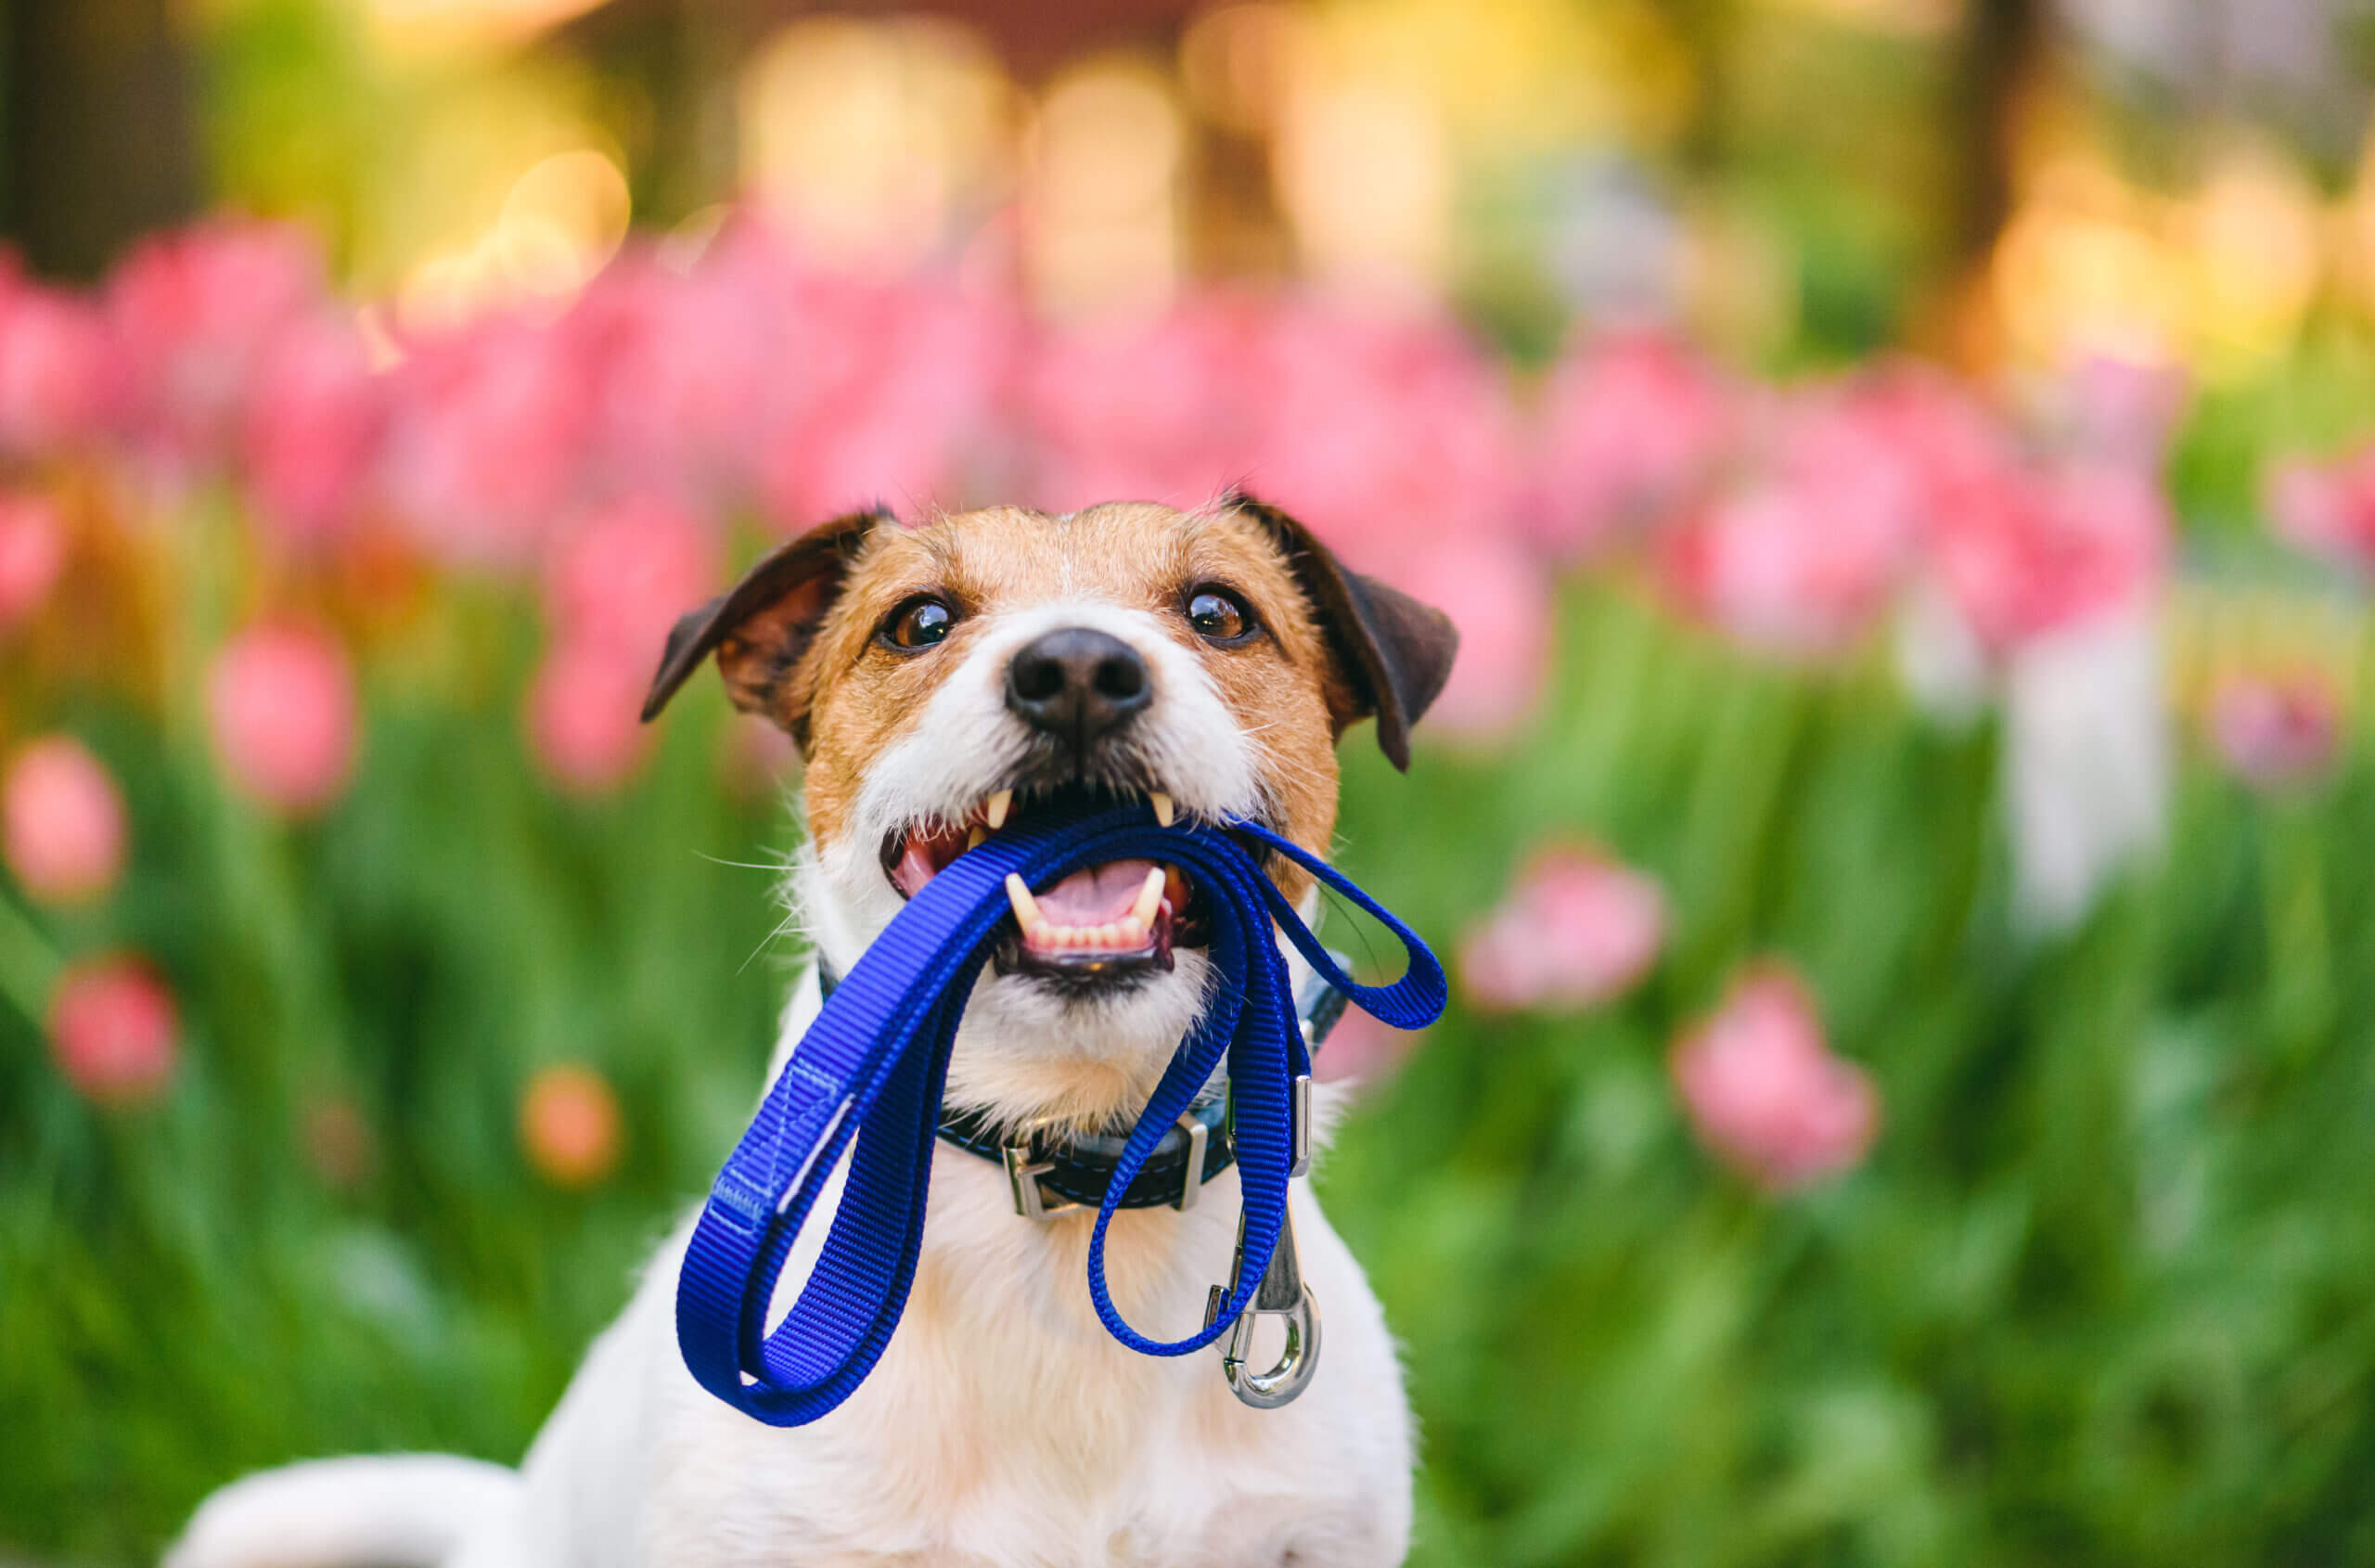 Finding the Best Dog Walking Service for Your Furry Friend’s Needs